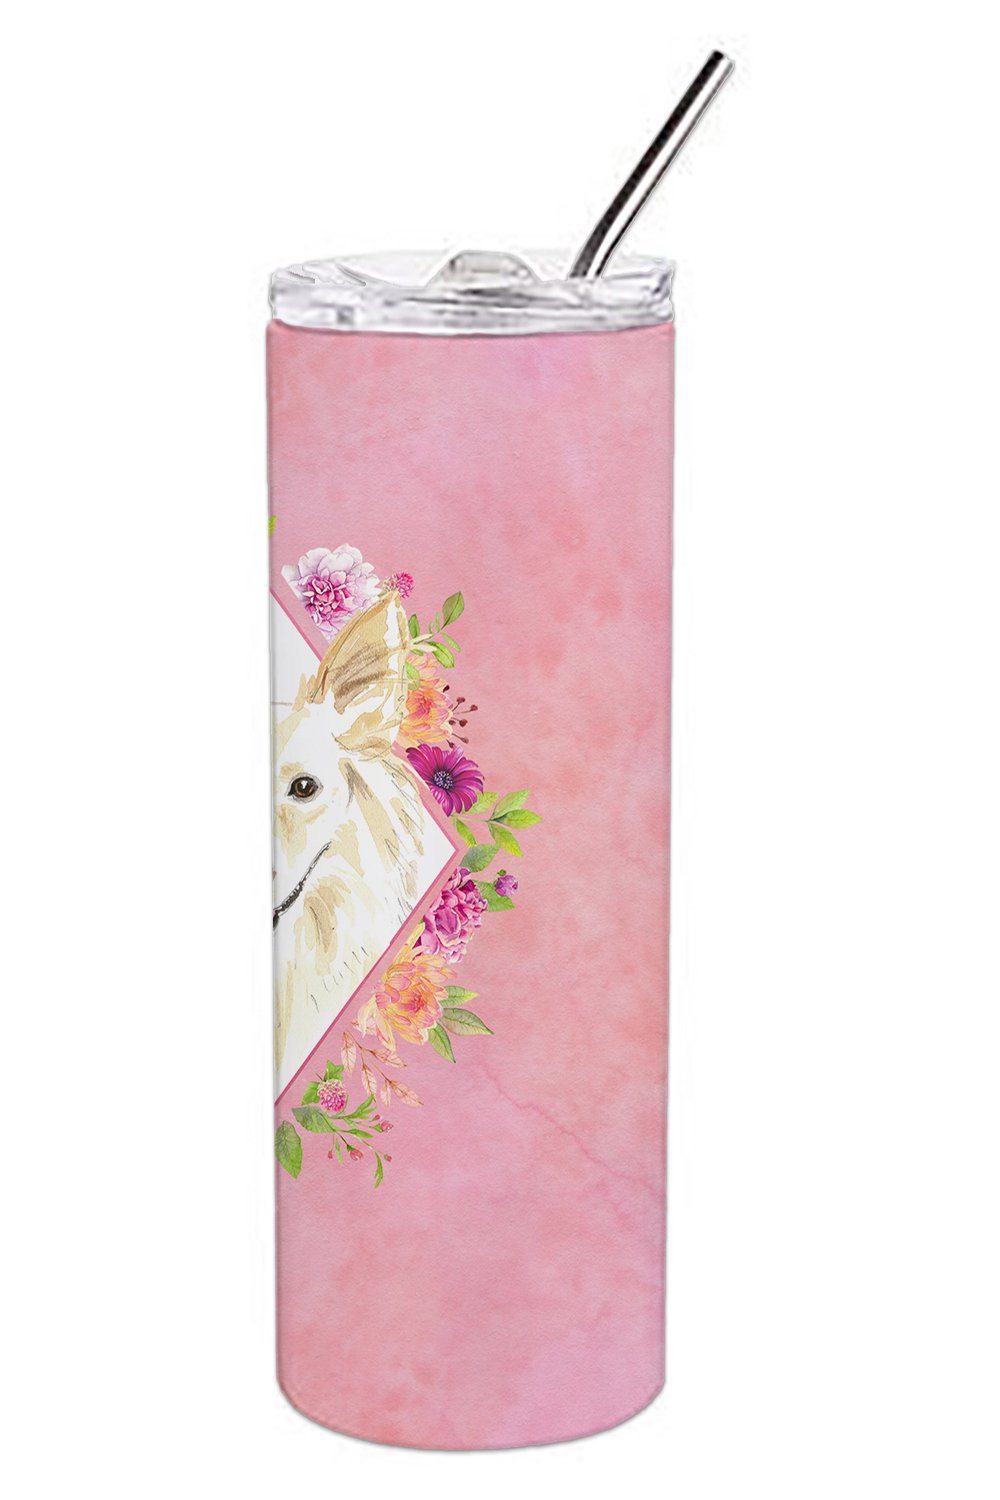 White Collie Pink Flowers Double Walled Stainless Steel 20 oz Skinny Tumbler CK4201TBL20 by Caroline's Treasures